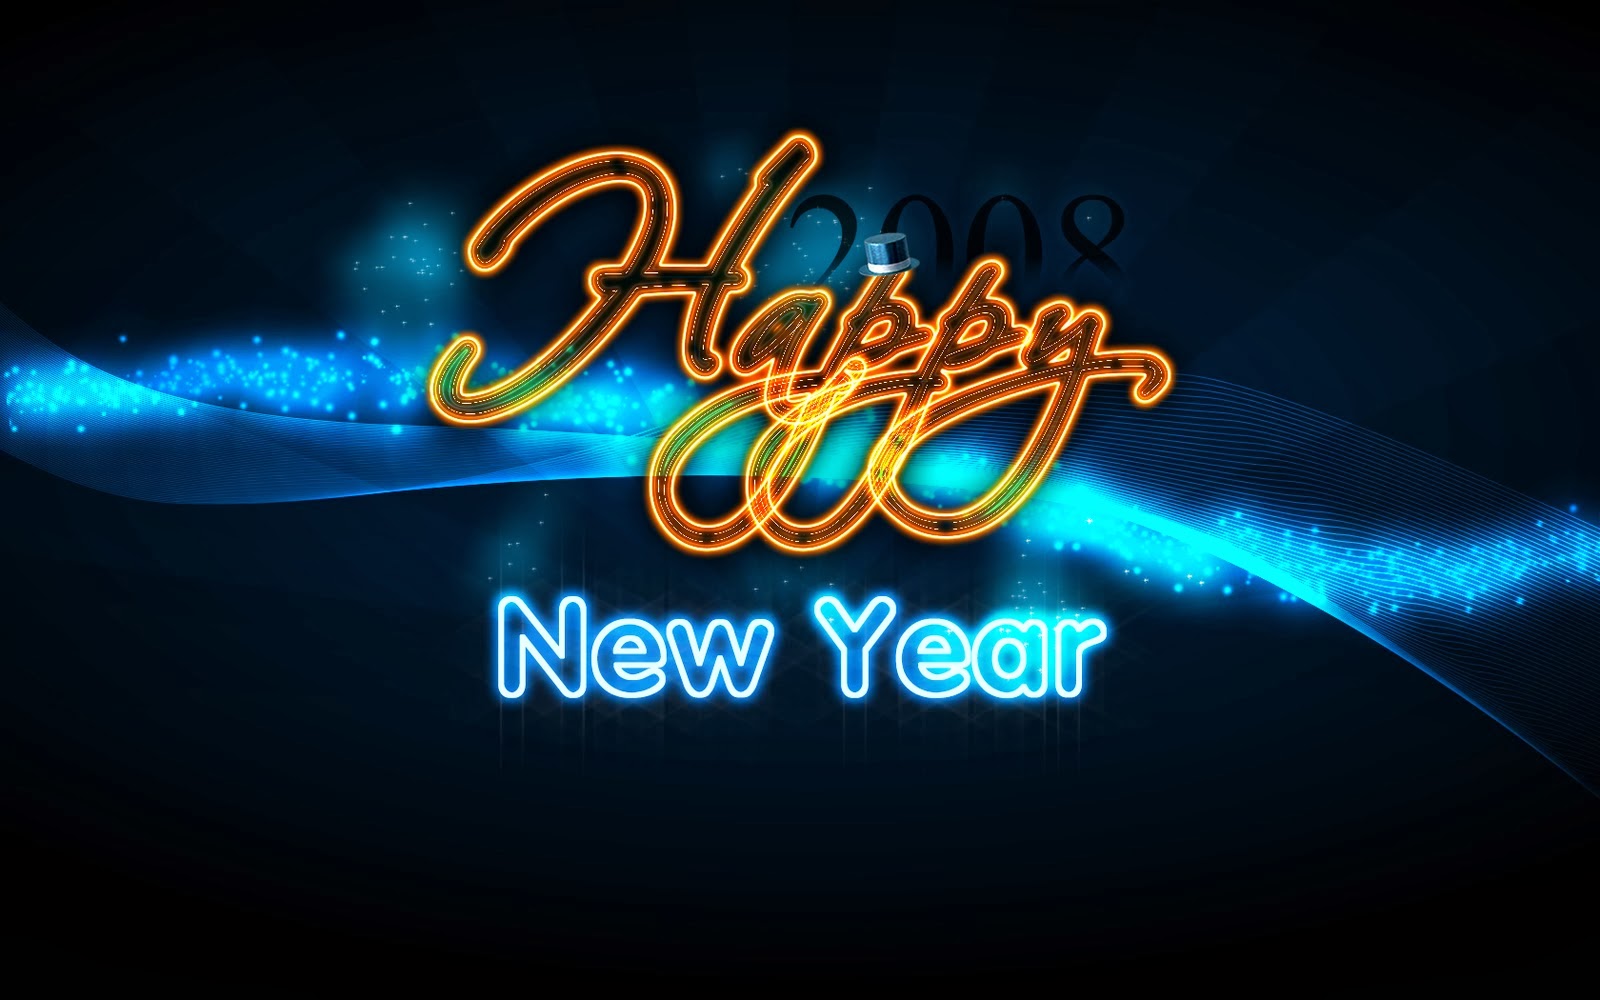 New Year 2014 Wallpapers: Beautiful Happy New Year 2014 Wallpapers